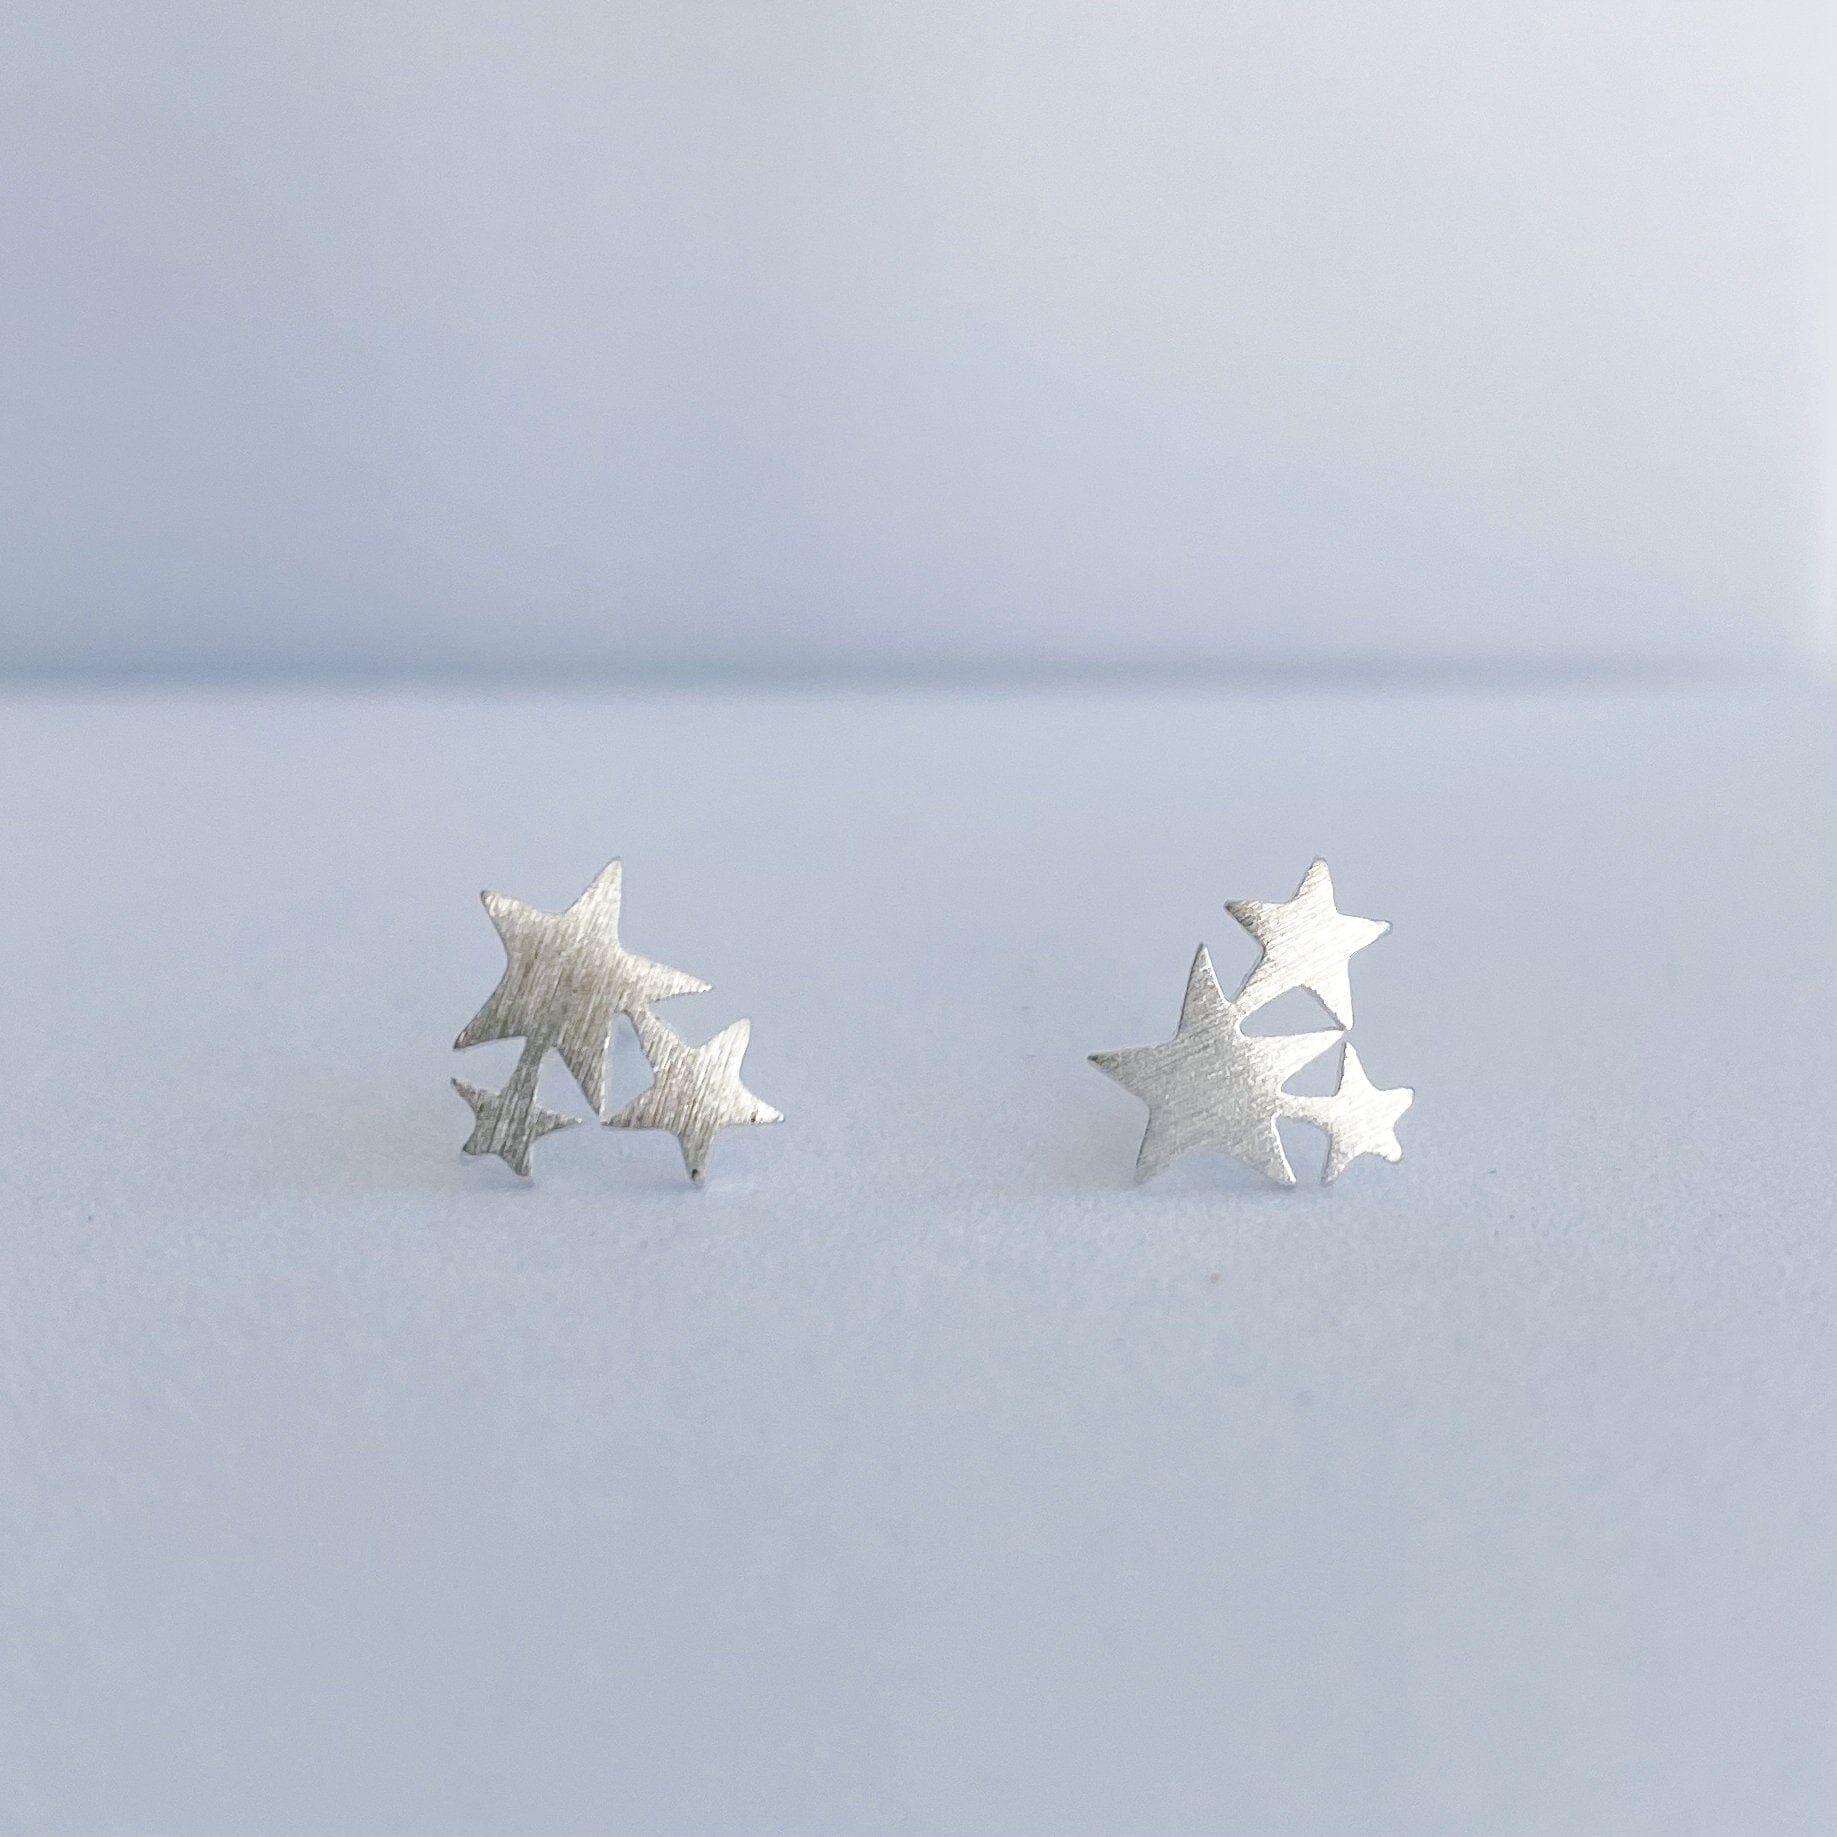 Gift for 30th birthday, 3 star stud earrings, Each star for each decade, Gift for her, Hello thirty